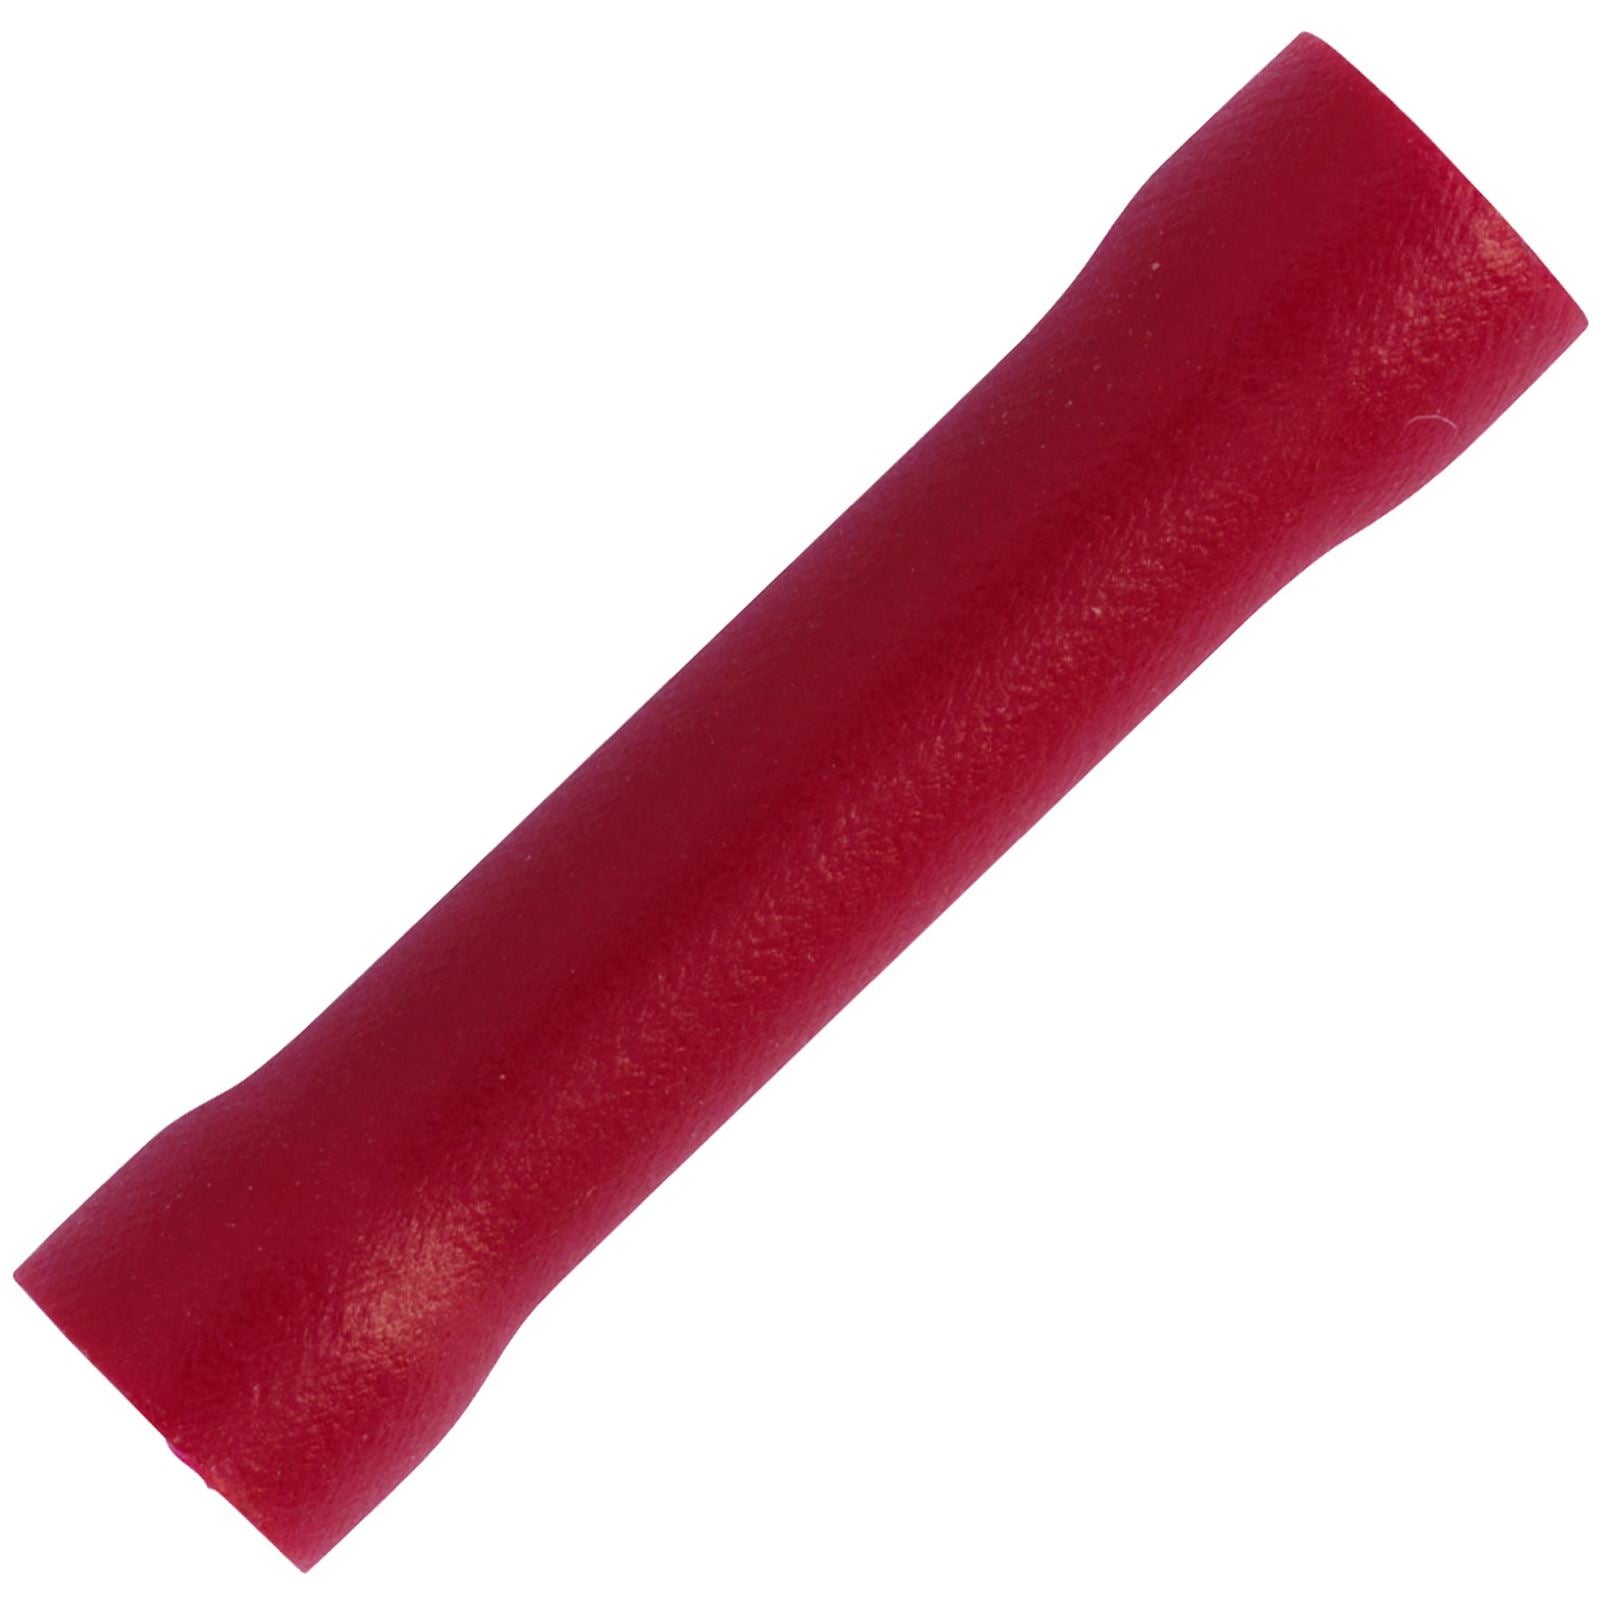 Sealey 100 Pack 3.3mm Red Butt Connector Terminal